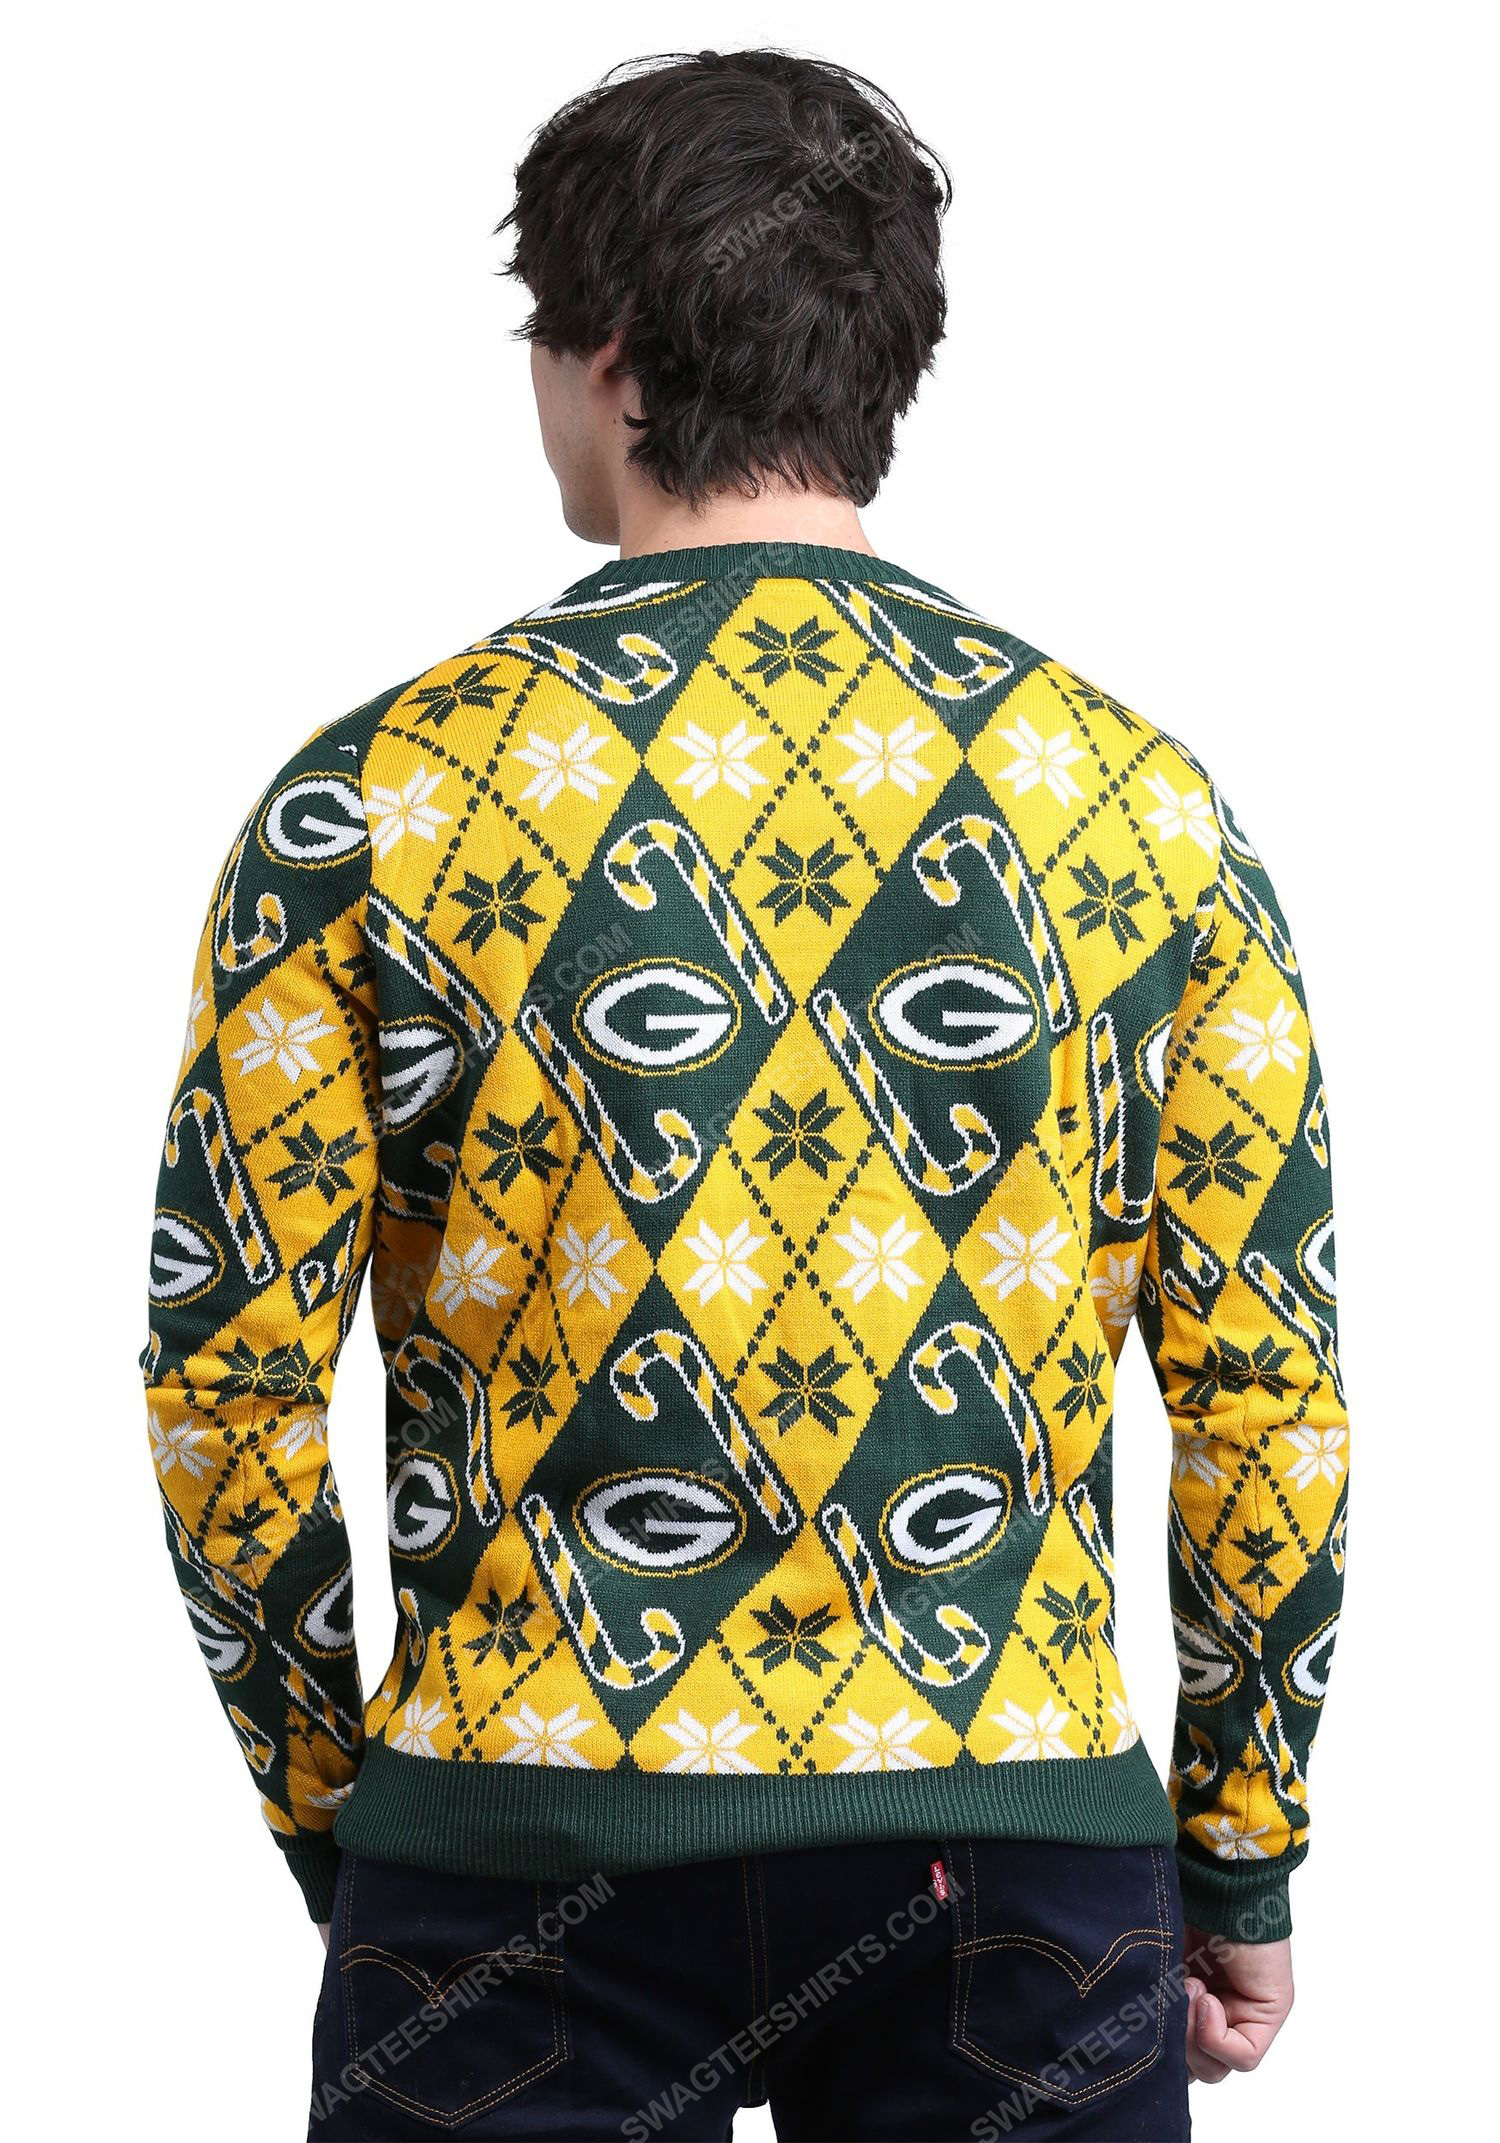 Green bay packers candy cane full print ugly christmas sweater 3